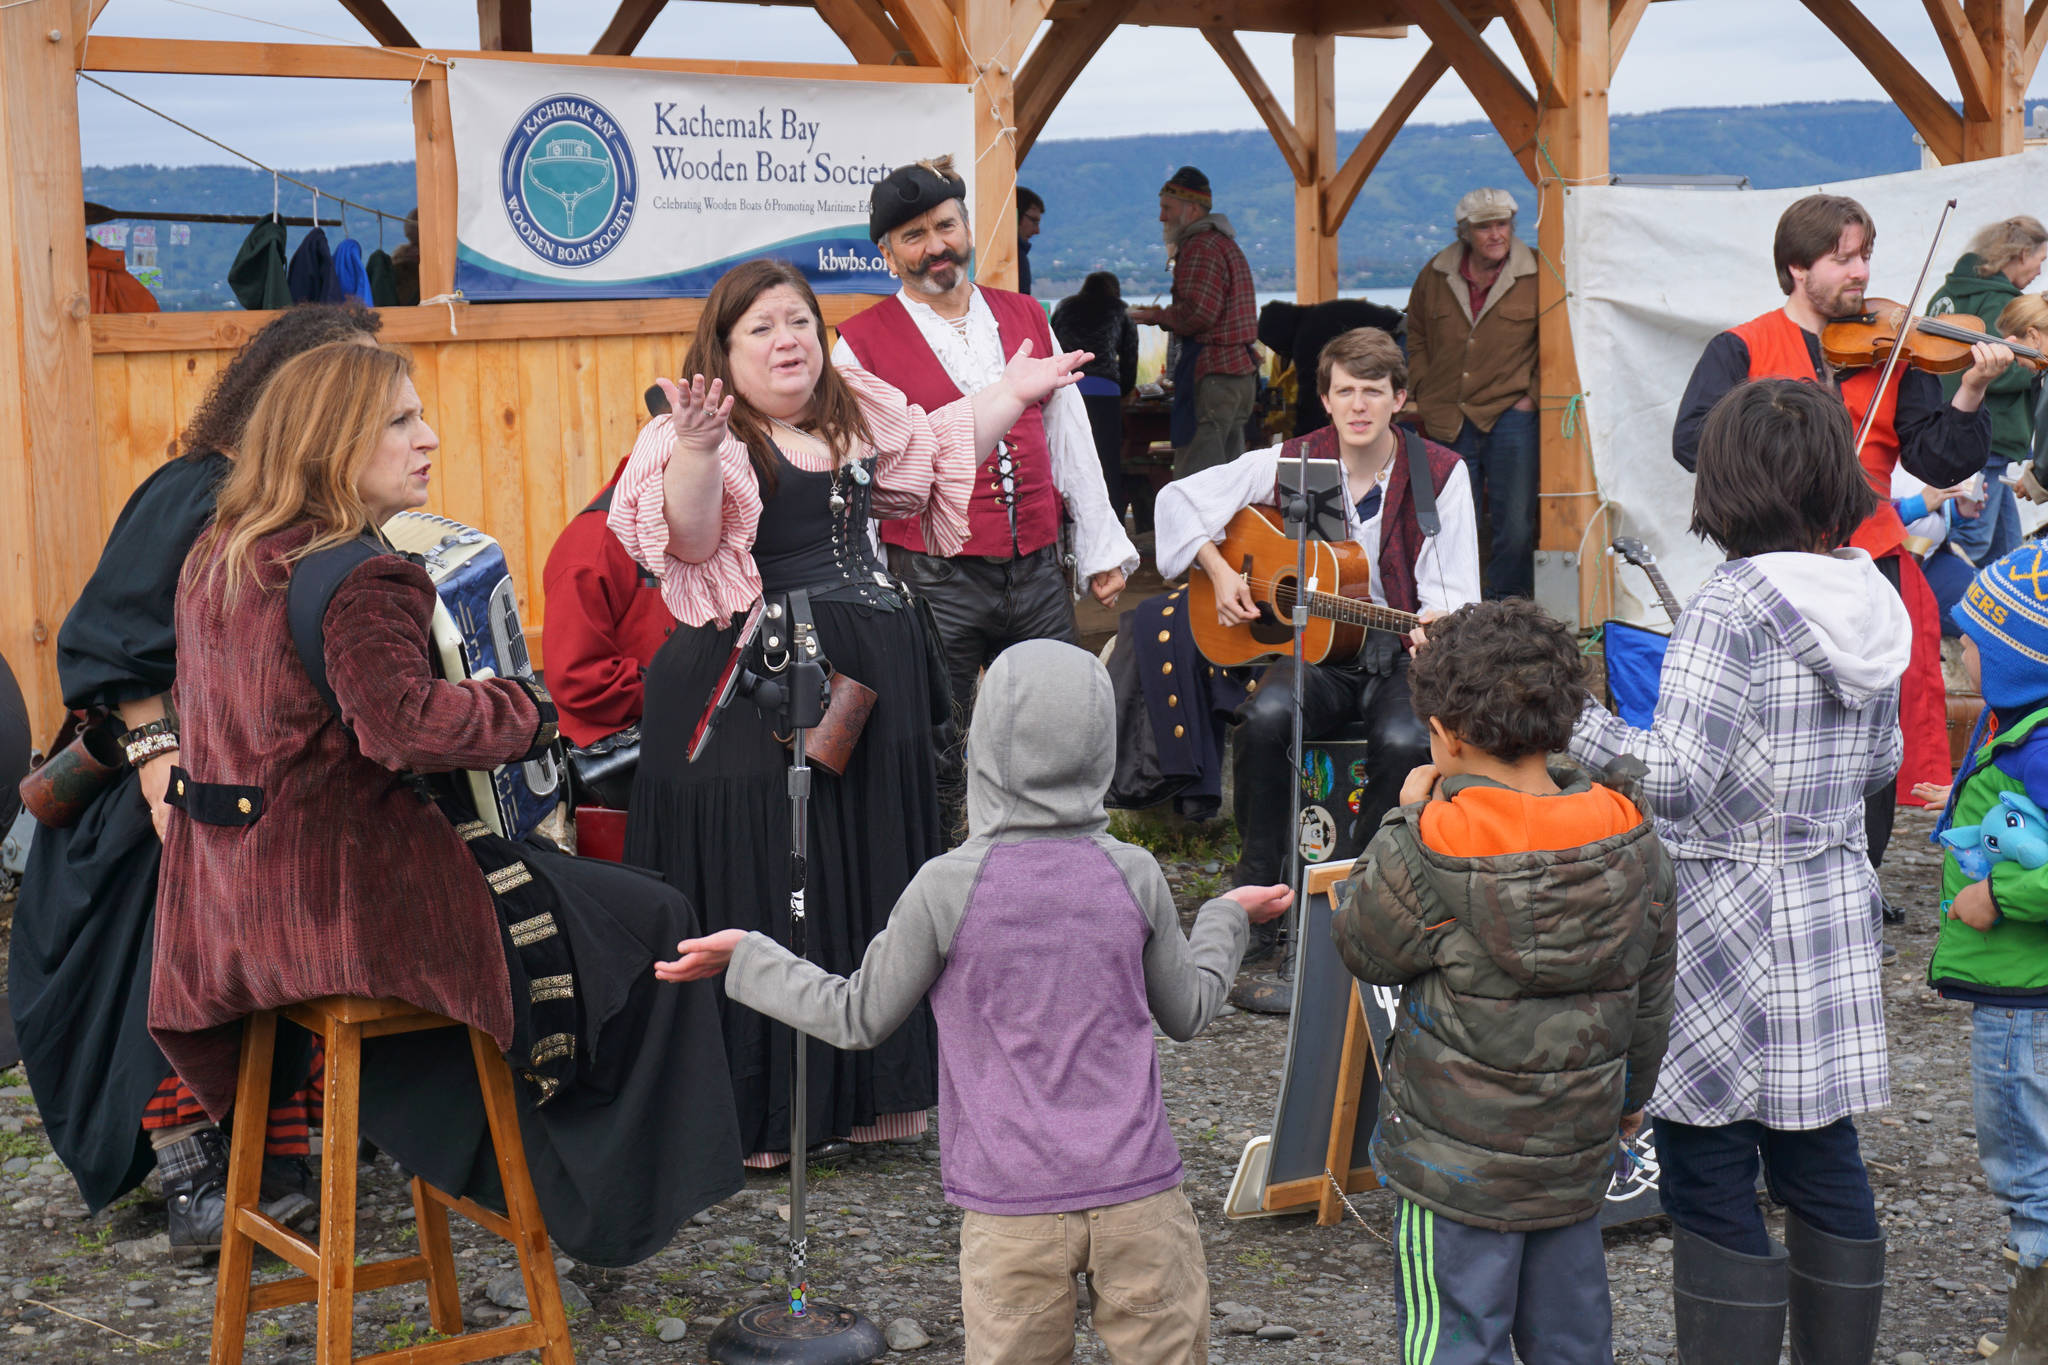 Erin Searcy-Dudgeon Wells of Rogues & Wenches, center, leads a sing along at the Kachemak Bay Wooden Boat Society Festival on Saturday, Sept. 2, 2017 at the Nick Dudiak Fishing Lagoon campground in Homer, Alaska. At left are Lucia Woofter and Lena Gonzales. At far right is Hunter Woofter, Devin Frey, second from right, and Bob Woofter. (Photo by Michael Armstrong, Homer News)